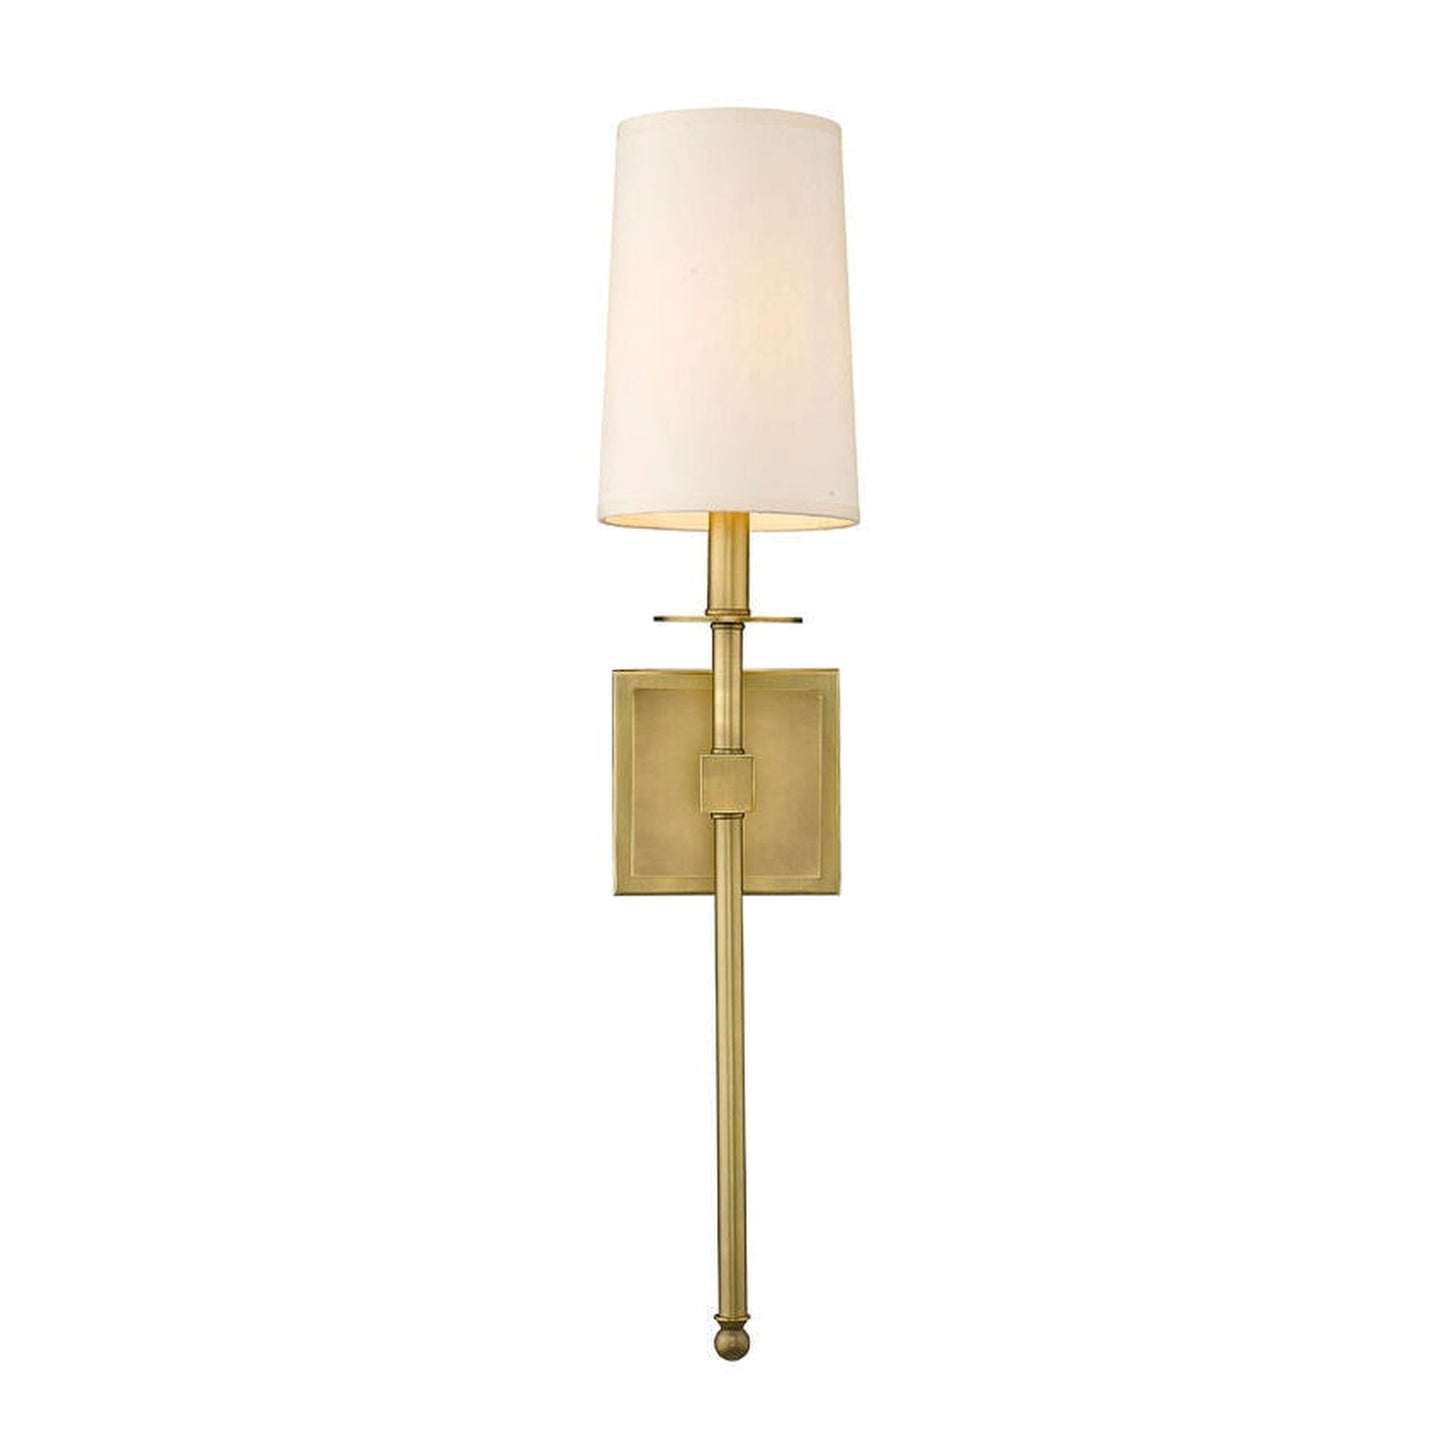 Z-Lite Camila 6" 1-Light Rubbed Brass Wall Sconce With Beige Parchment Paper Shade